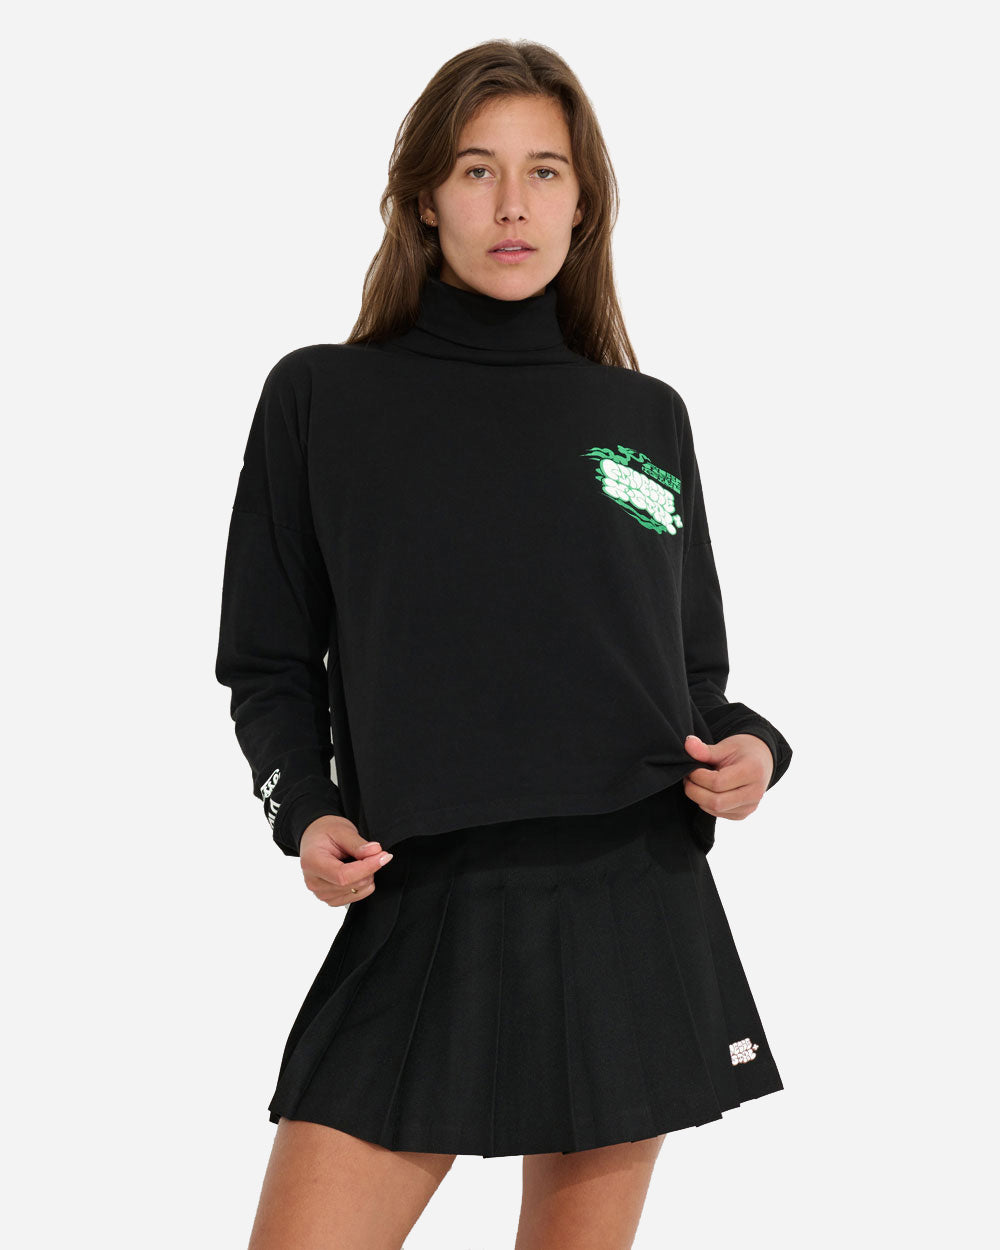 Finesse x X-Girl Long Sleeve Turtle Neck Black 1411GD-BLK